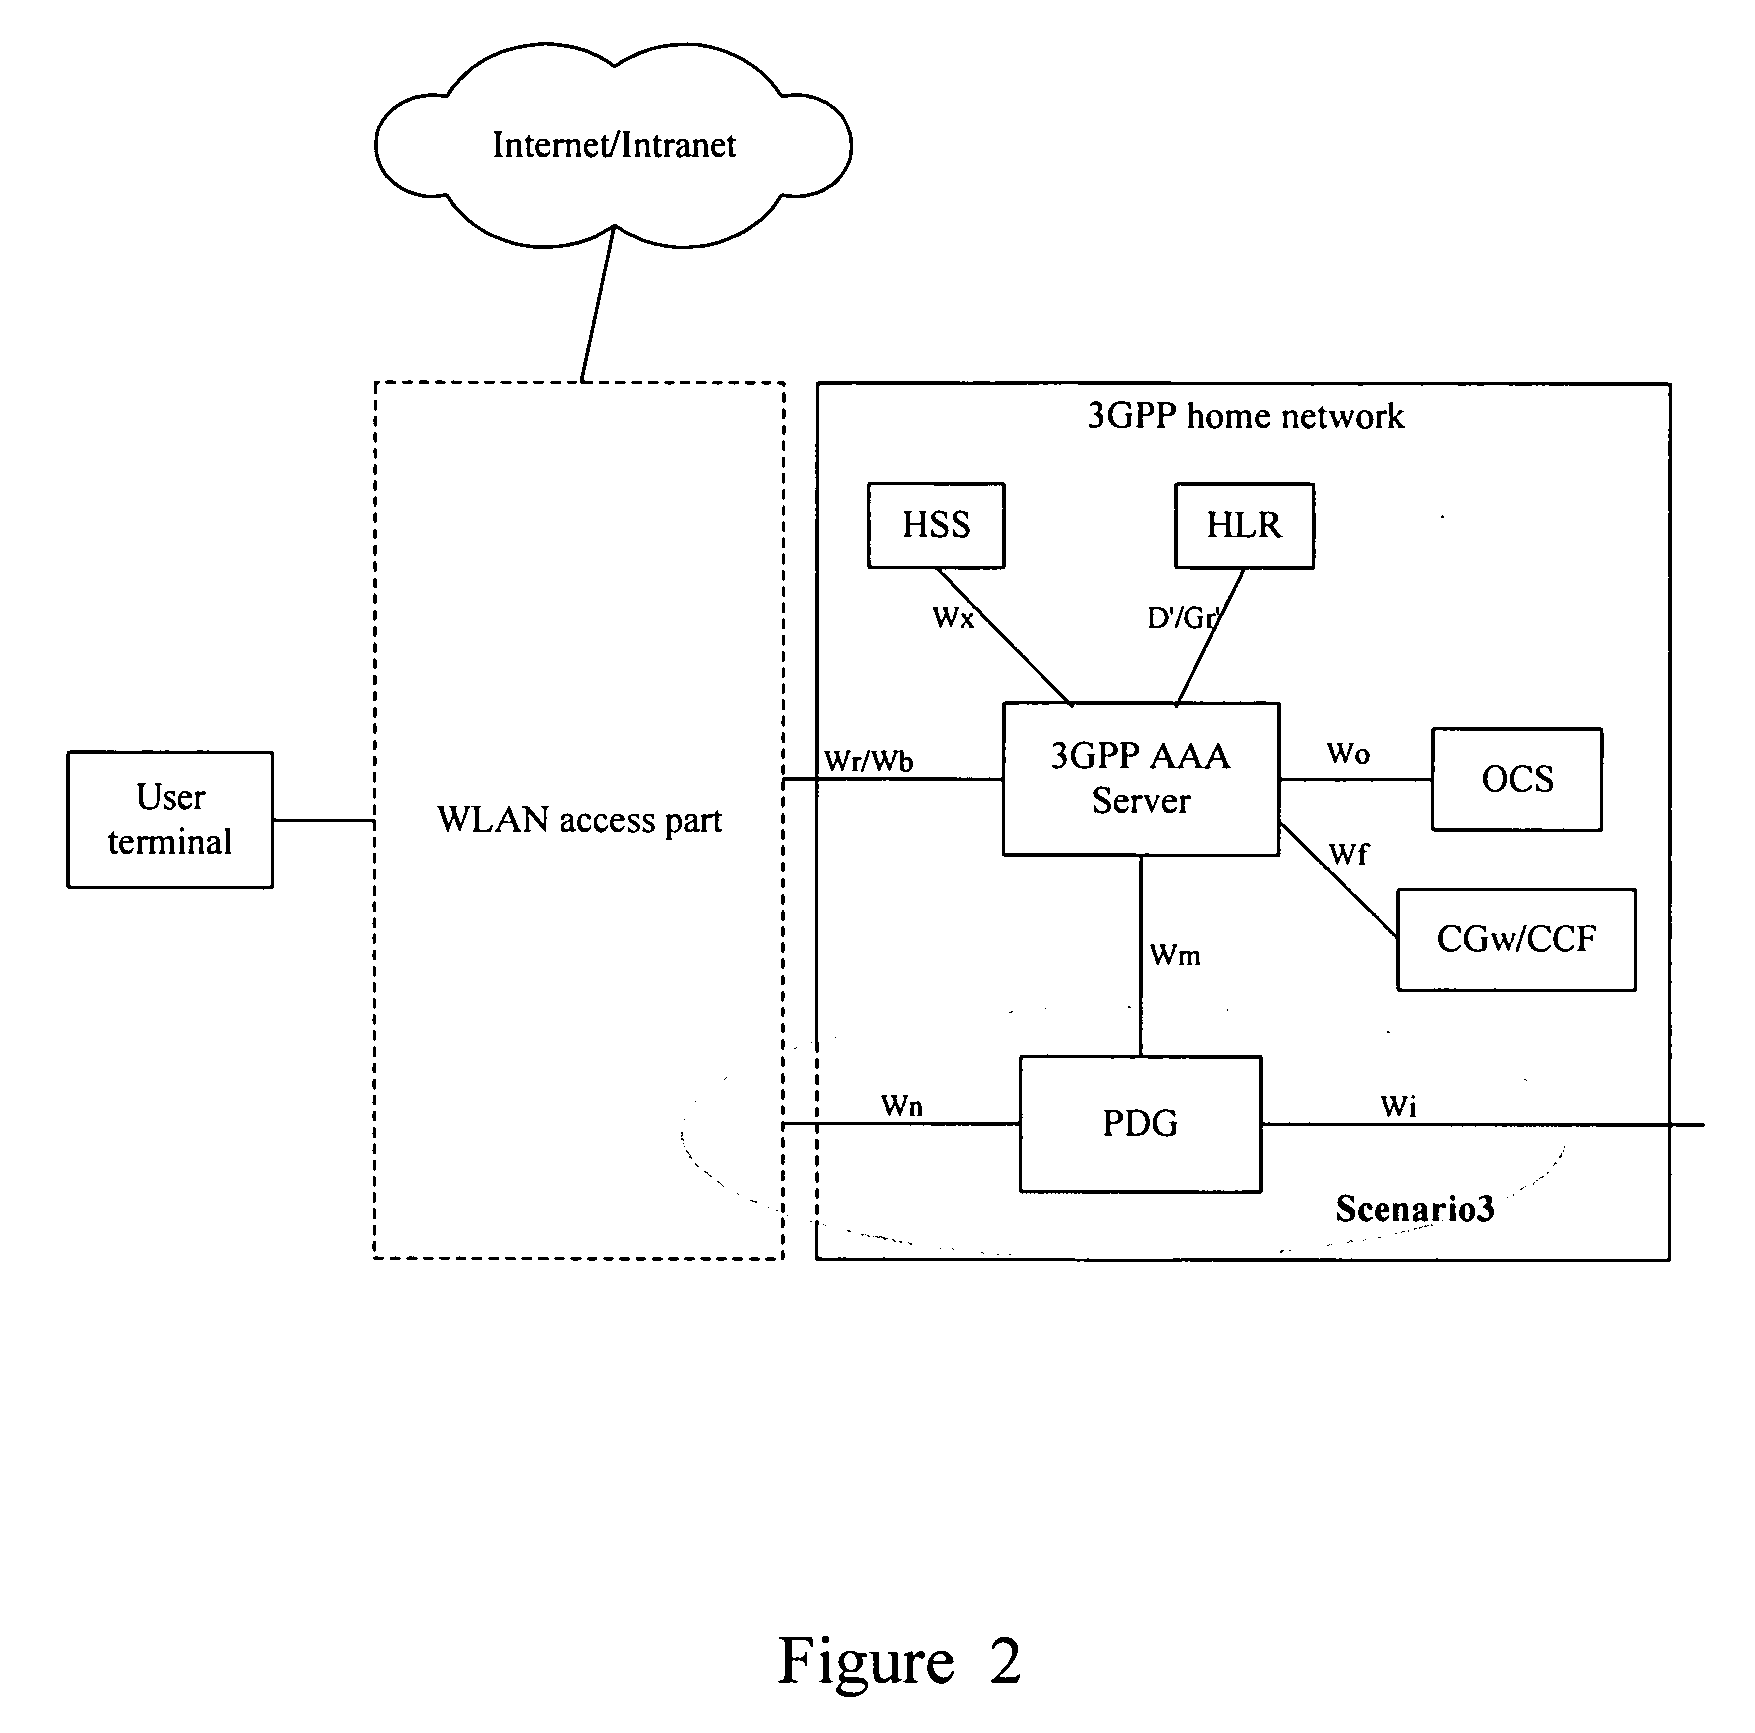 Method for processing network selection information for a user terminal in a wireless local area network